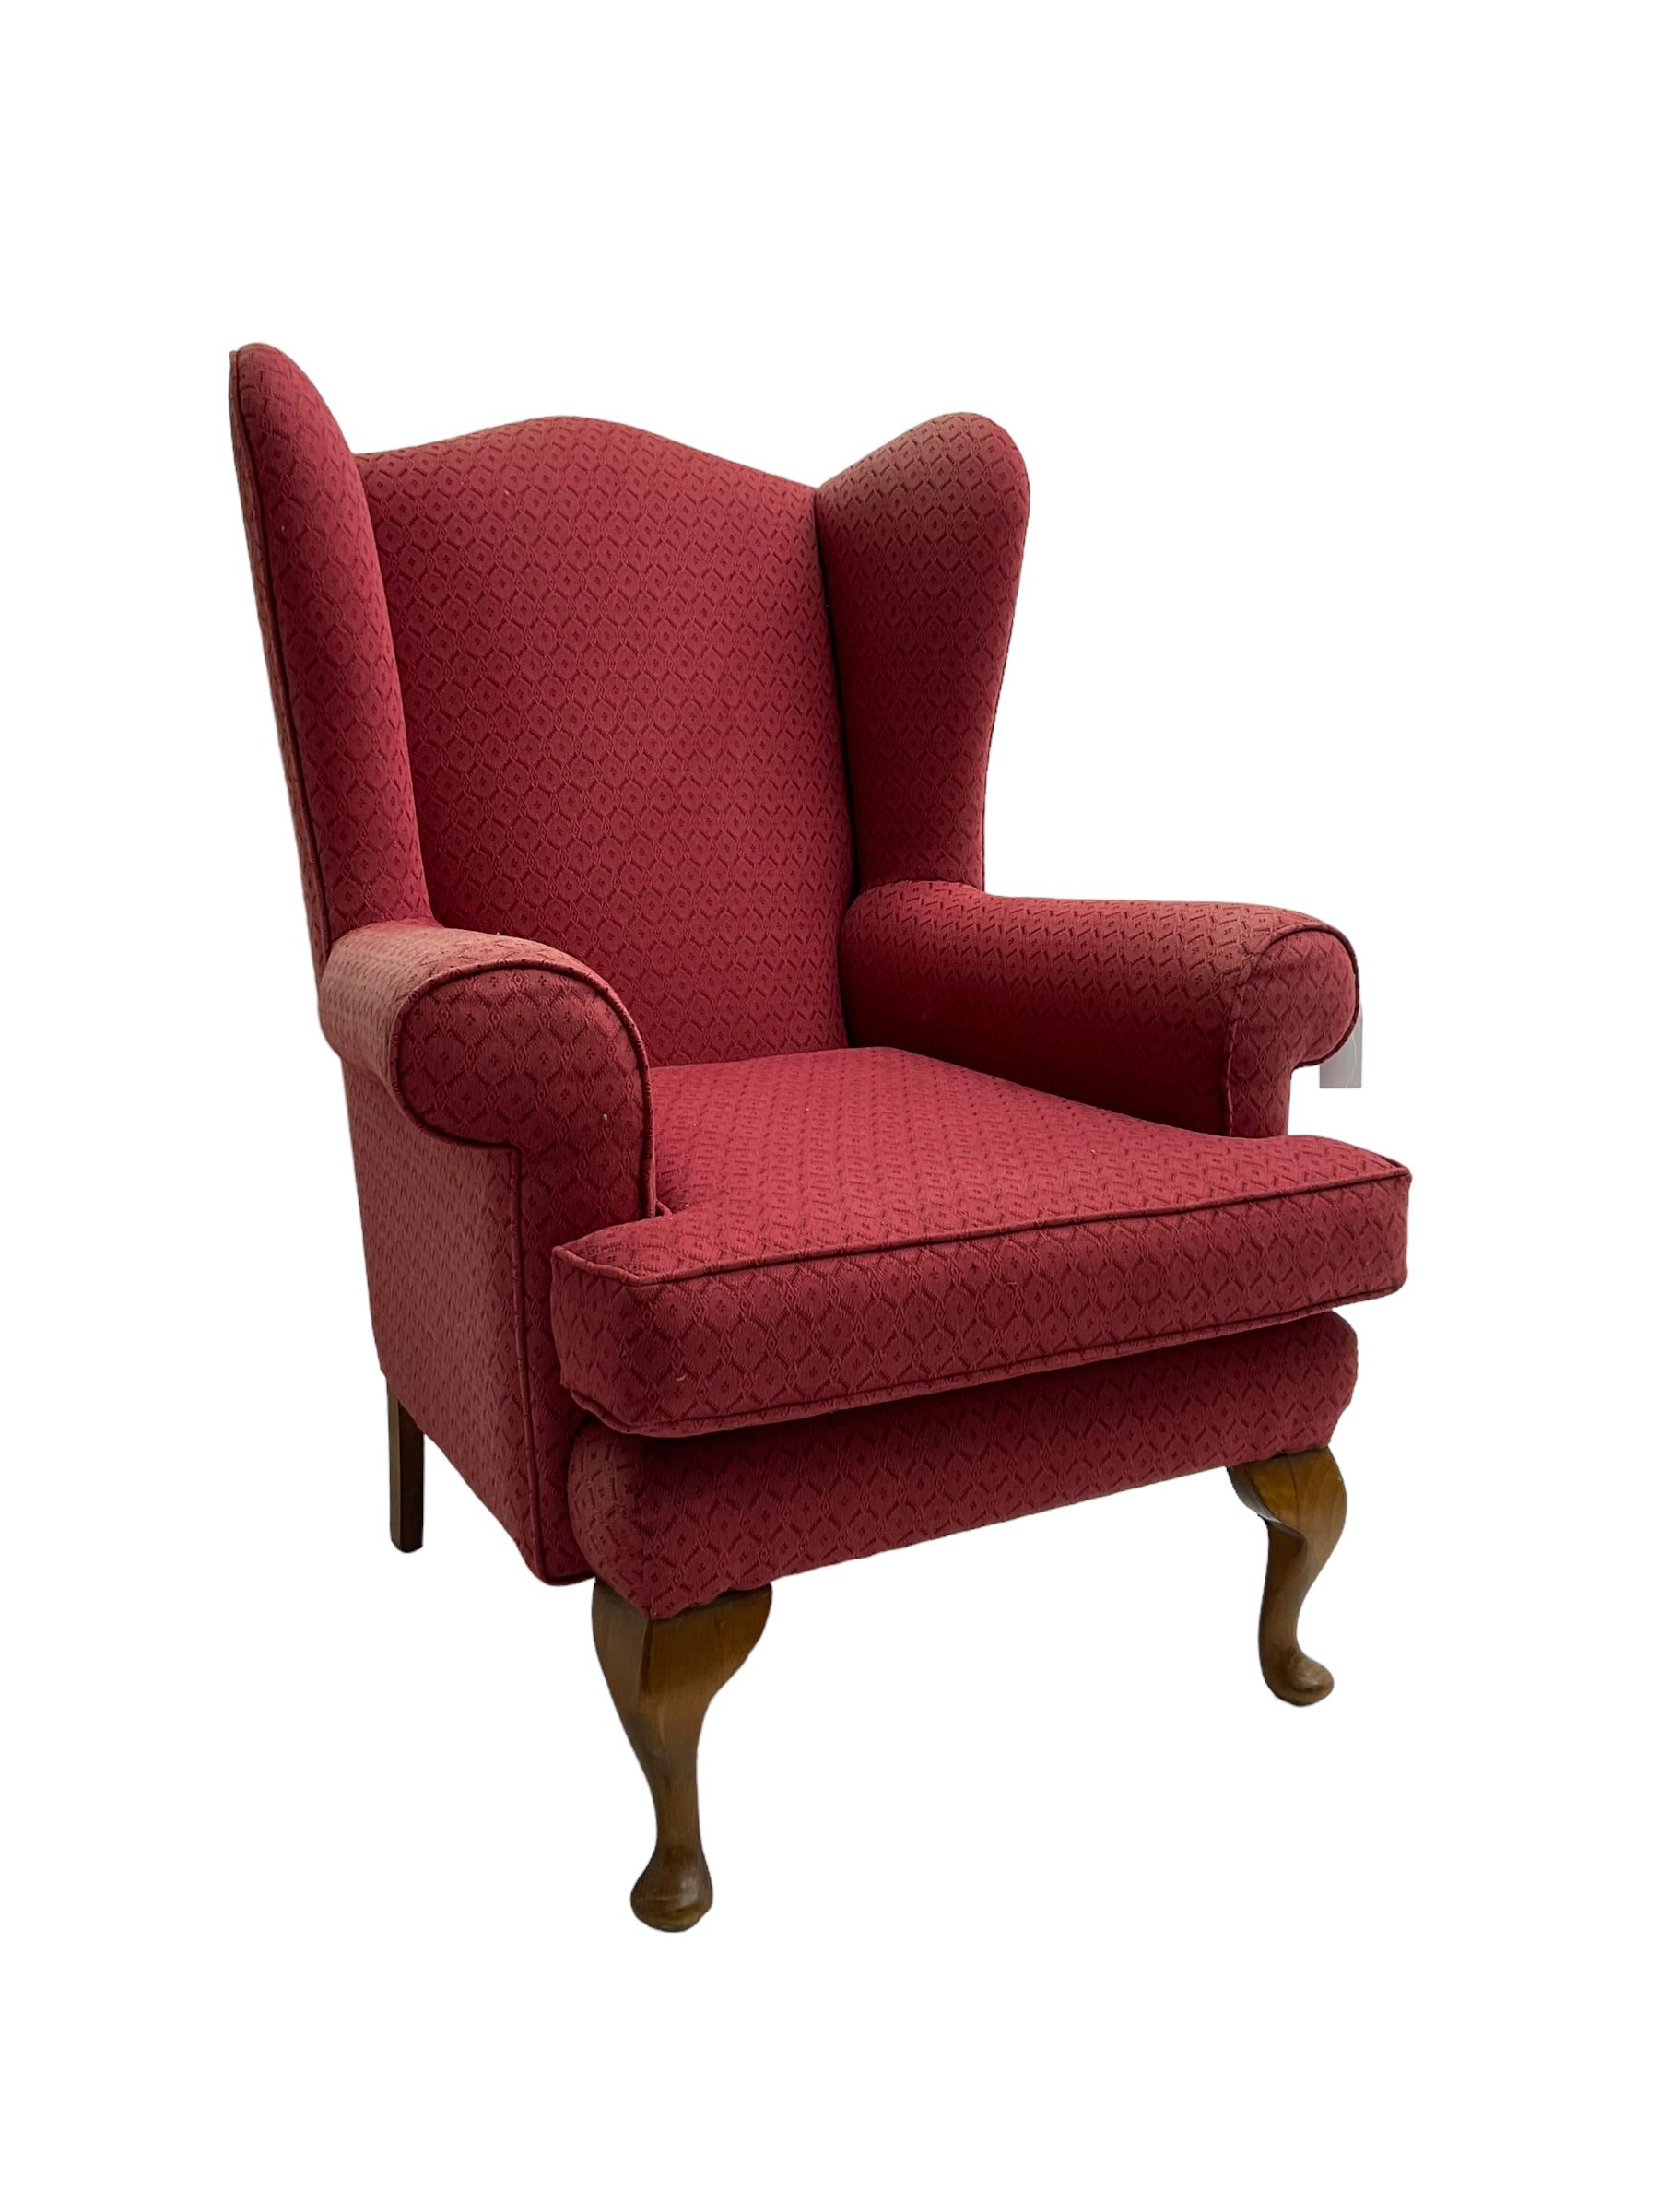 Queen Anne design wingback armchair - Image 6 of 7